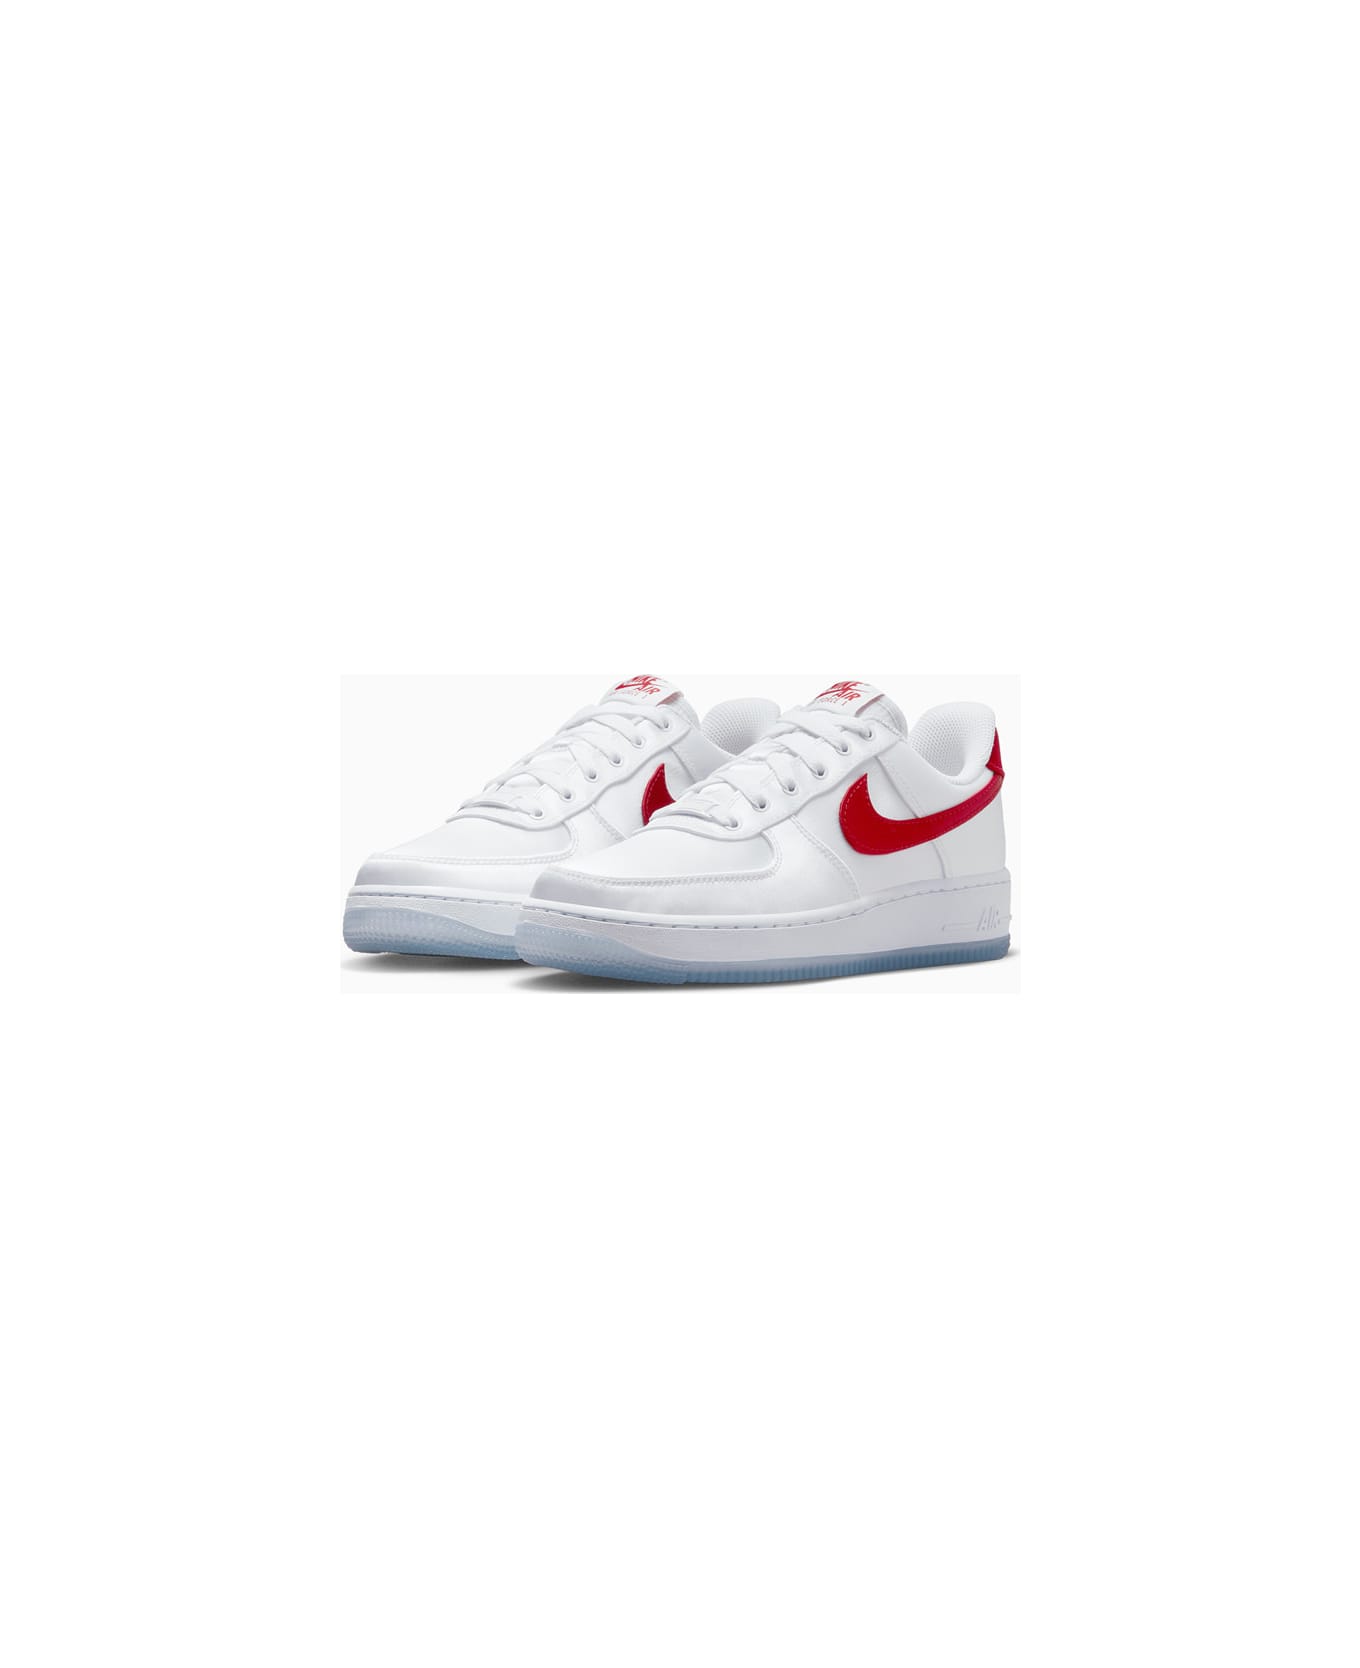 Nike Air Force 1 '07 Ess Snkr Sneakers Dx6541-100 - White スニーカー